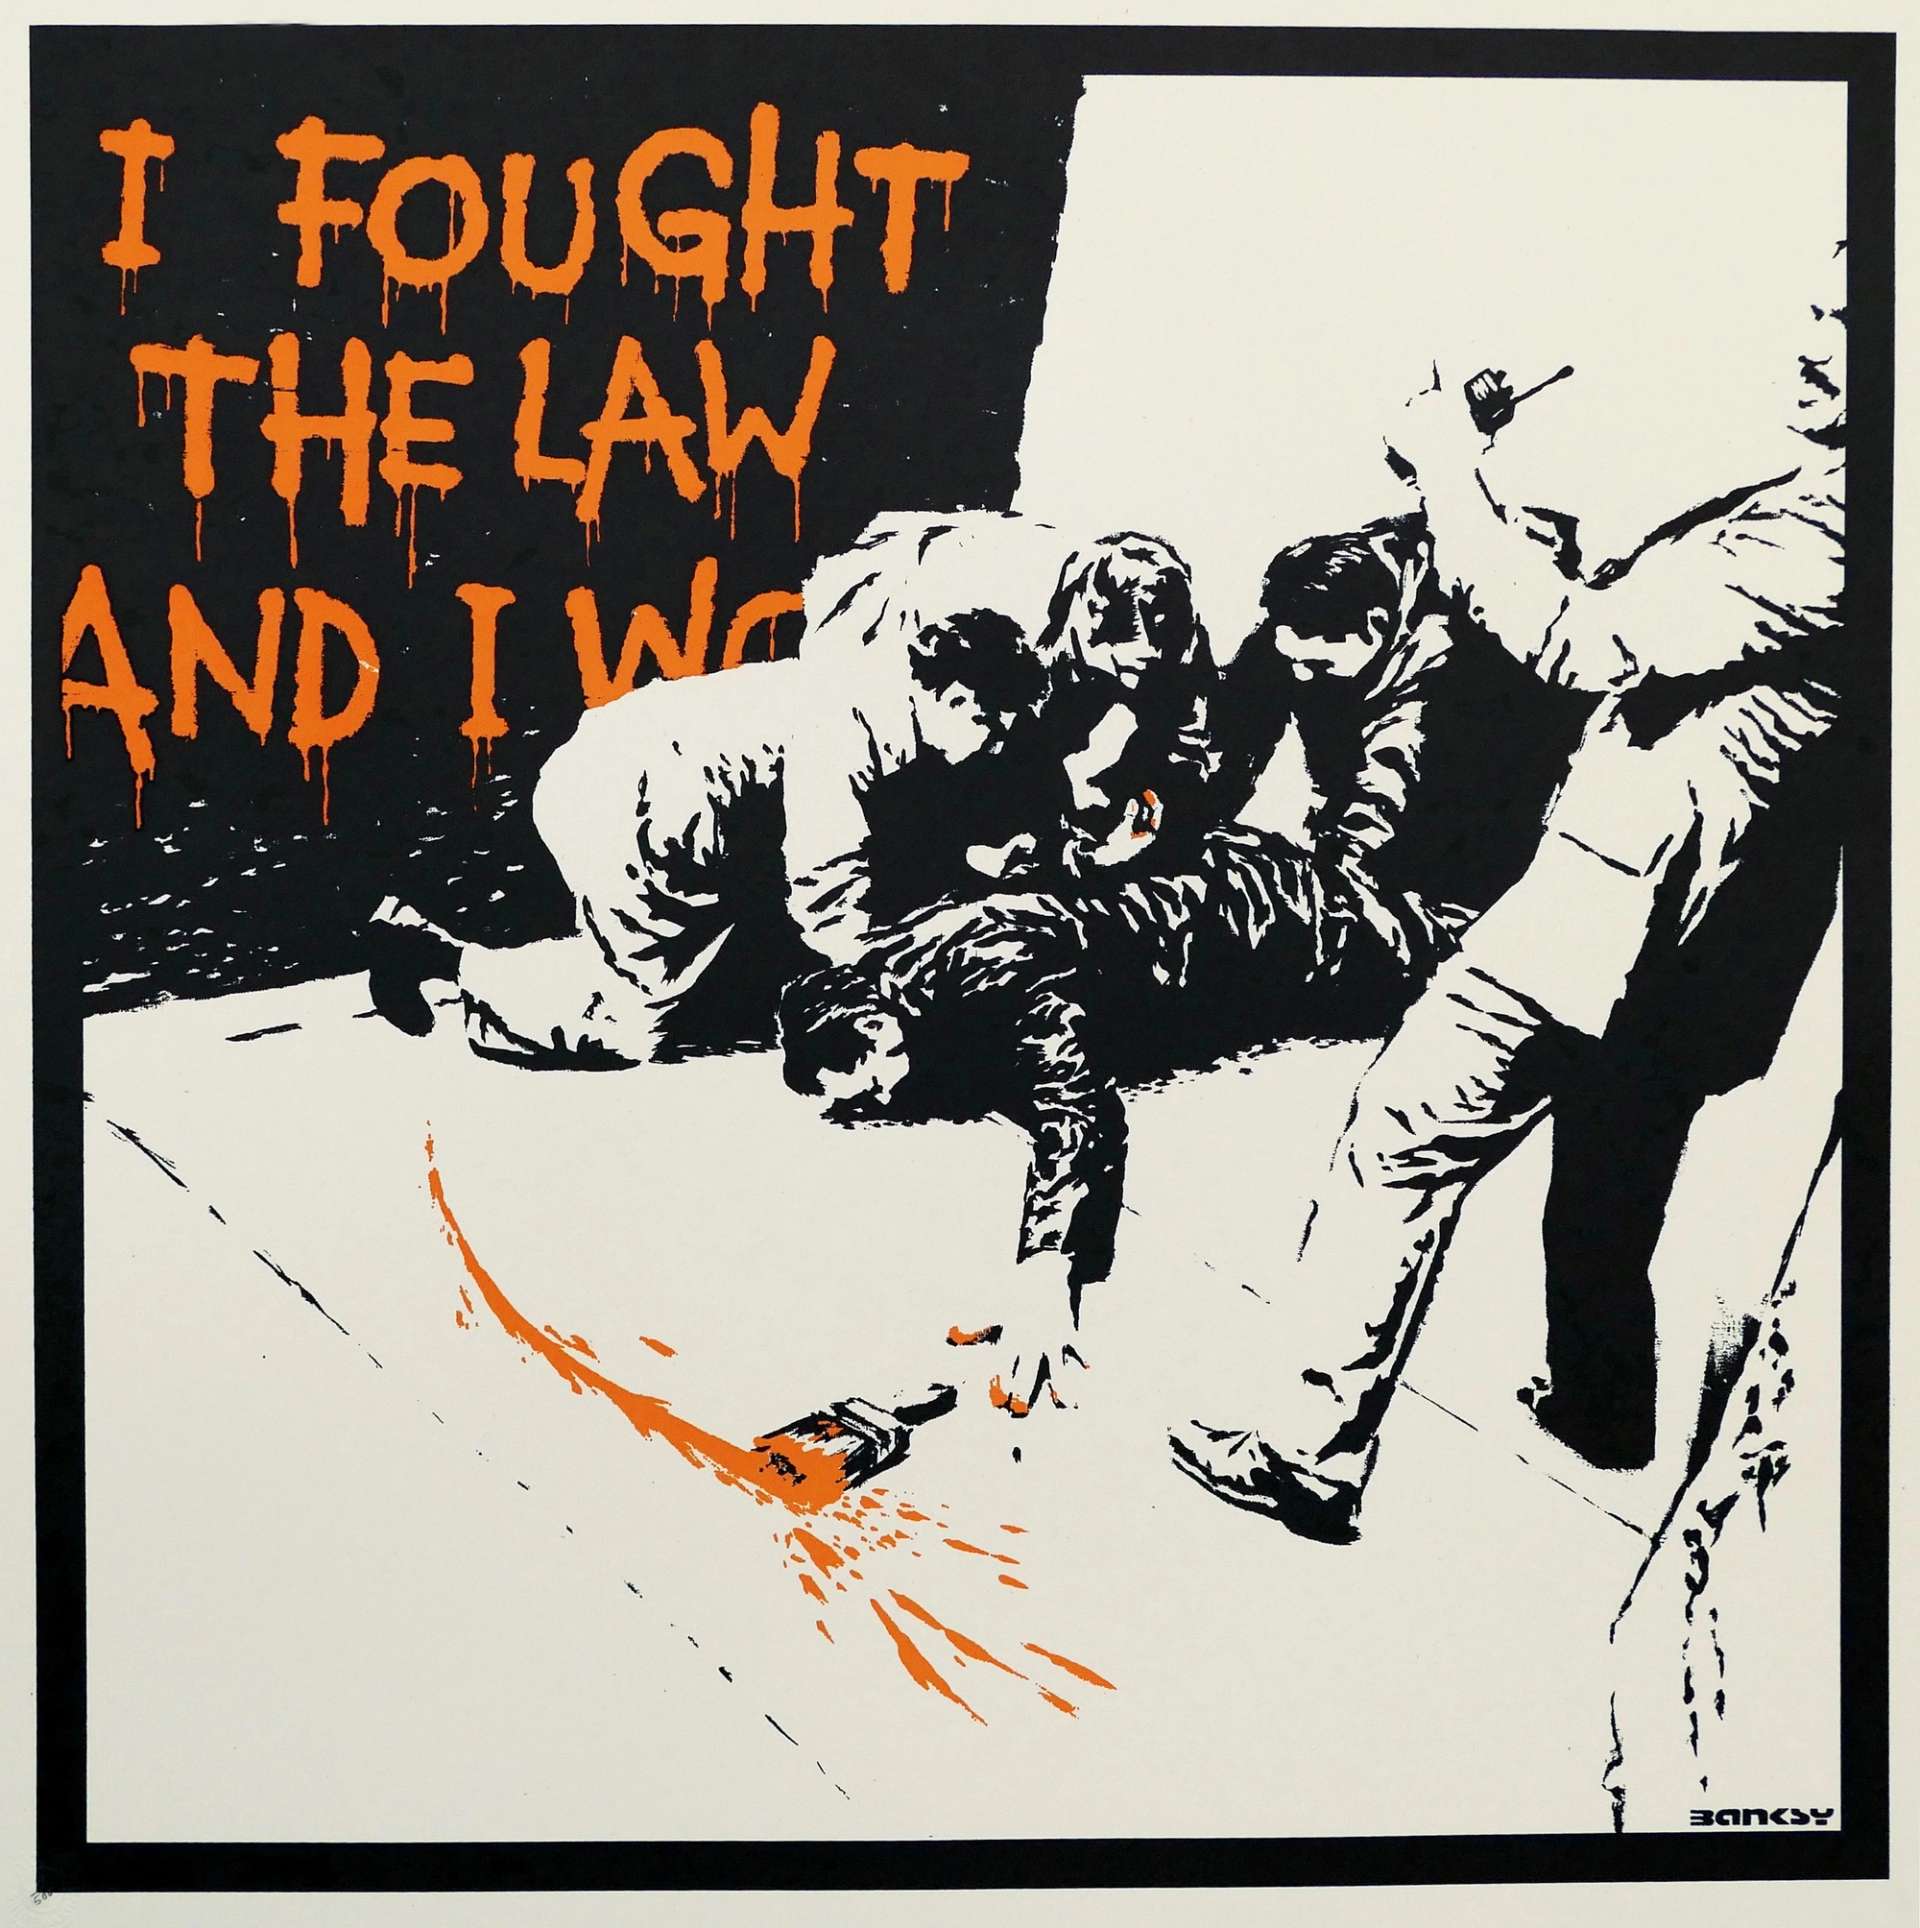 I Fought The Law - Unsigned Print by Banksy 2004 - MyArtBroker